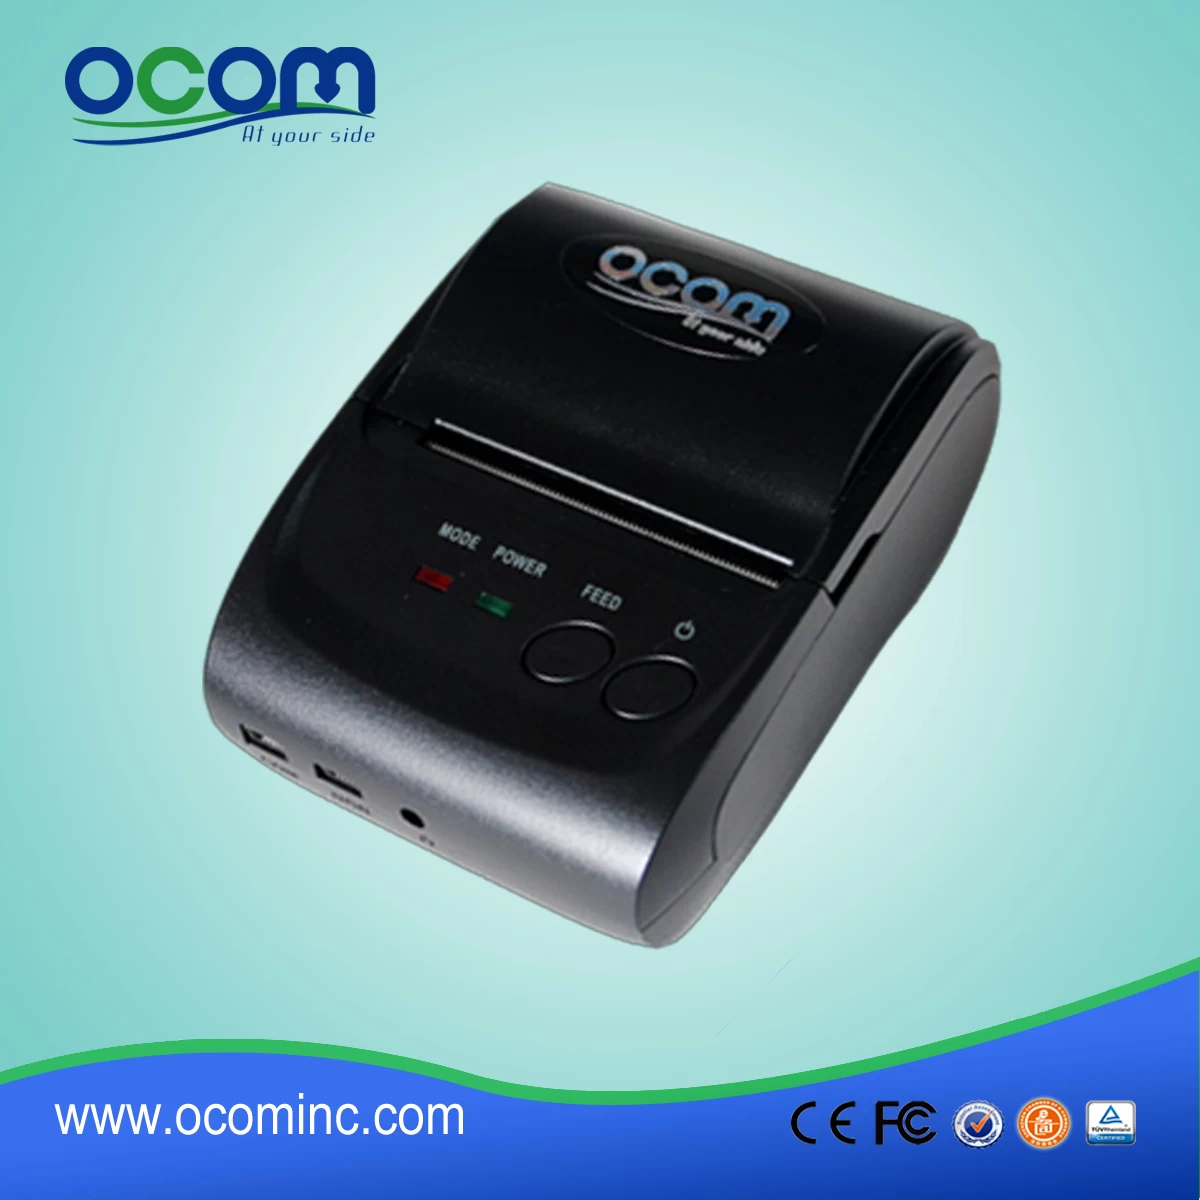 58mm Mini Bluetooth Thermal Receipt Printer for Android and iOS